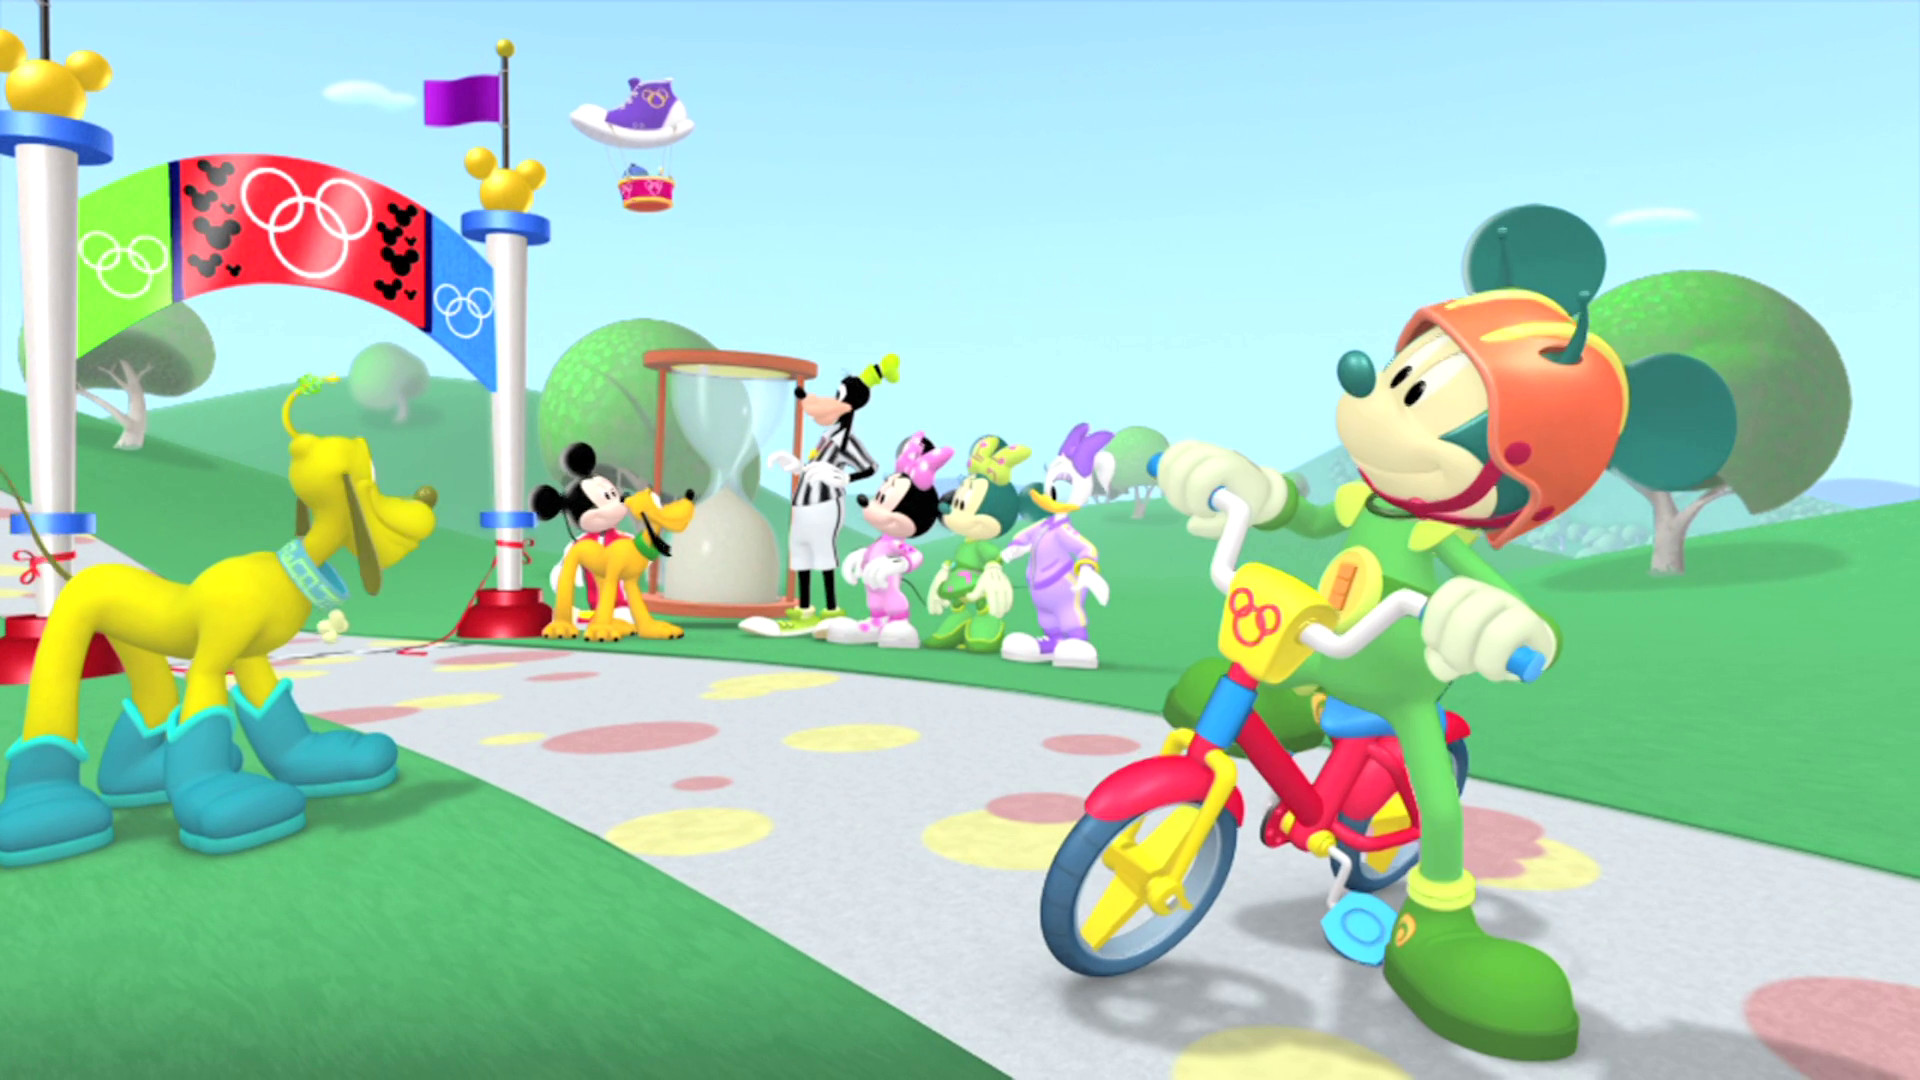 Mickey Mouse Clubhouse Images Wallpapers (57+ images)